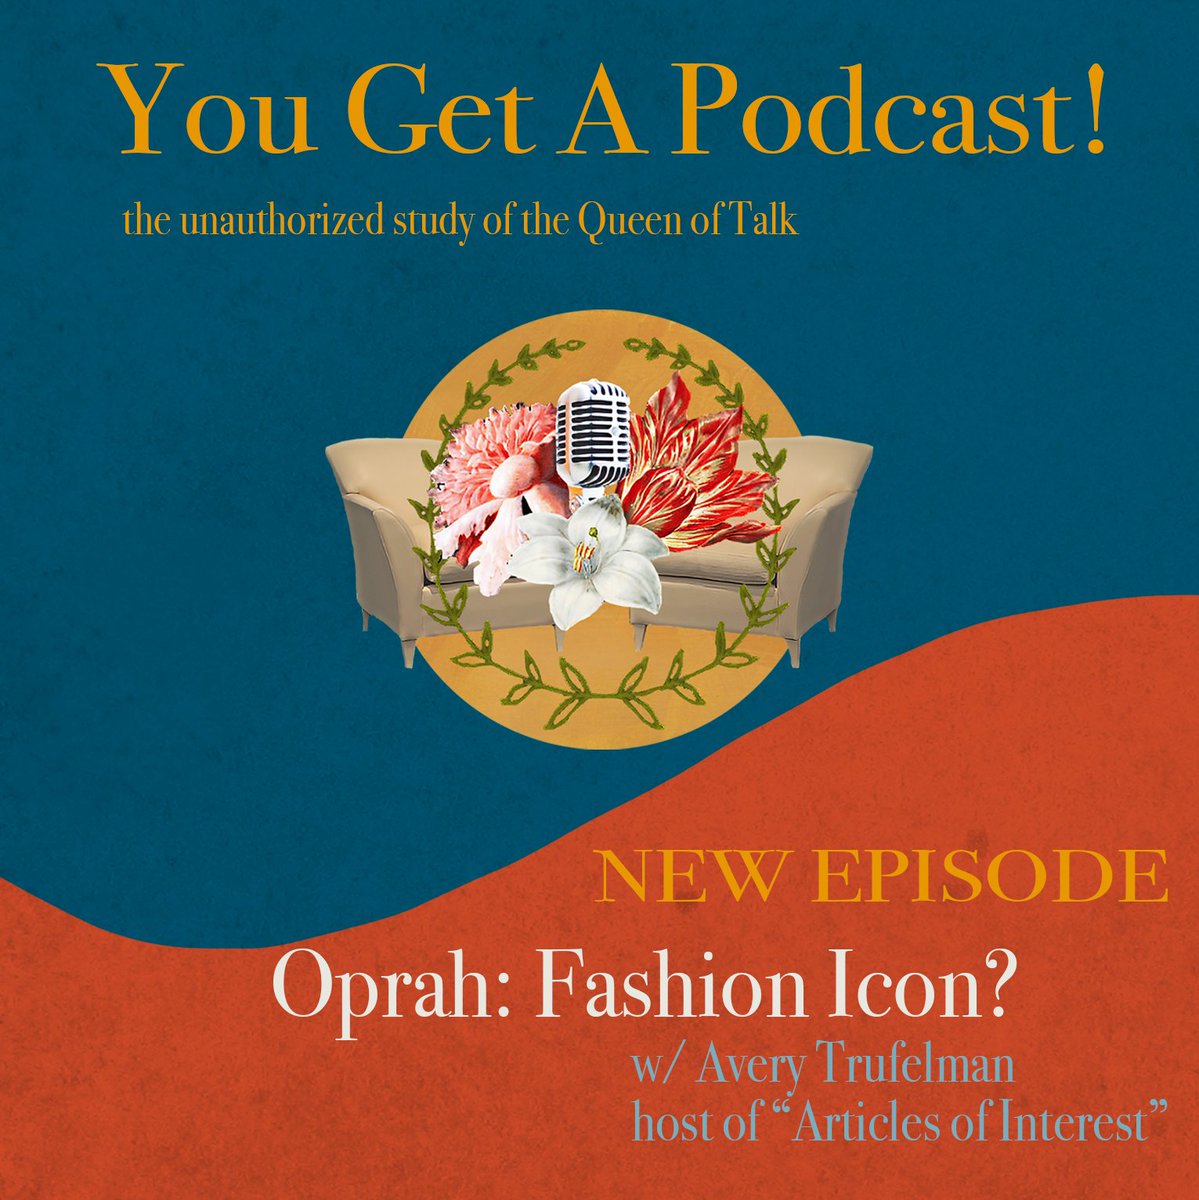 New episode! What better way to wrap up our summer season than with our fellow @radiotopia host @trufelman to discuss Oprah's influence on fashion -- from the clothes she wears to the brands she's promoted. Such a fun episode!